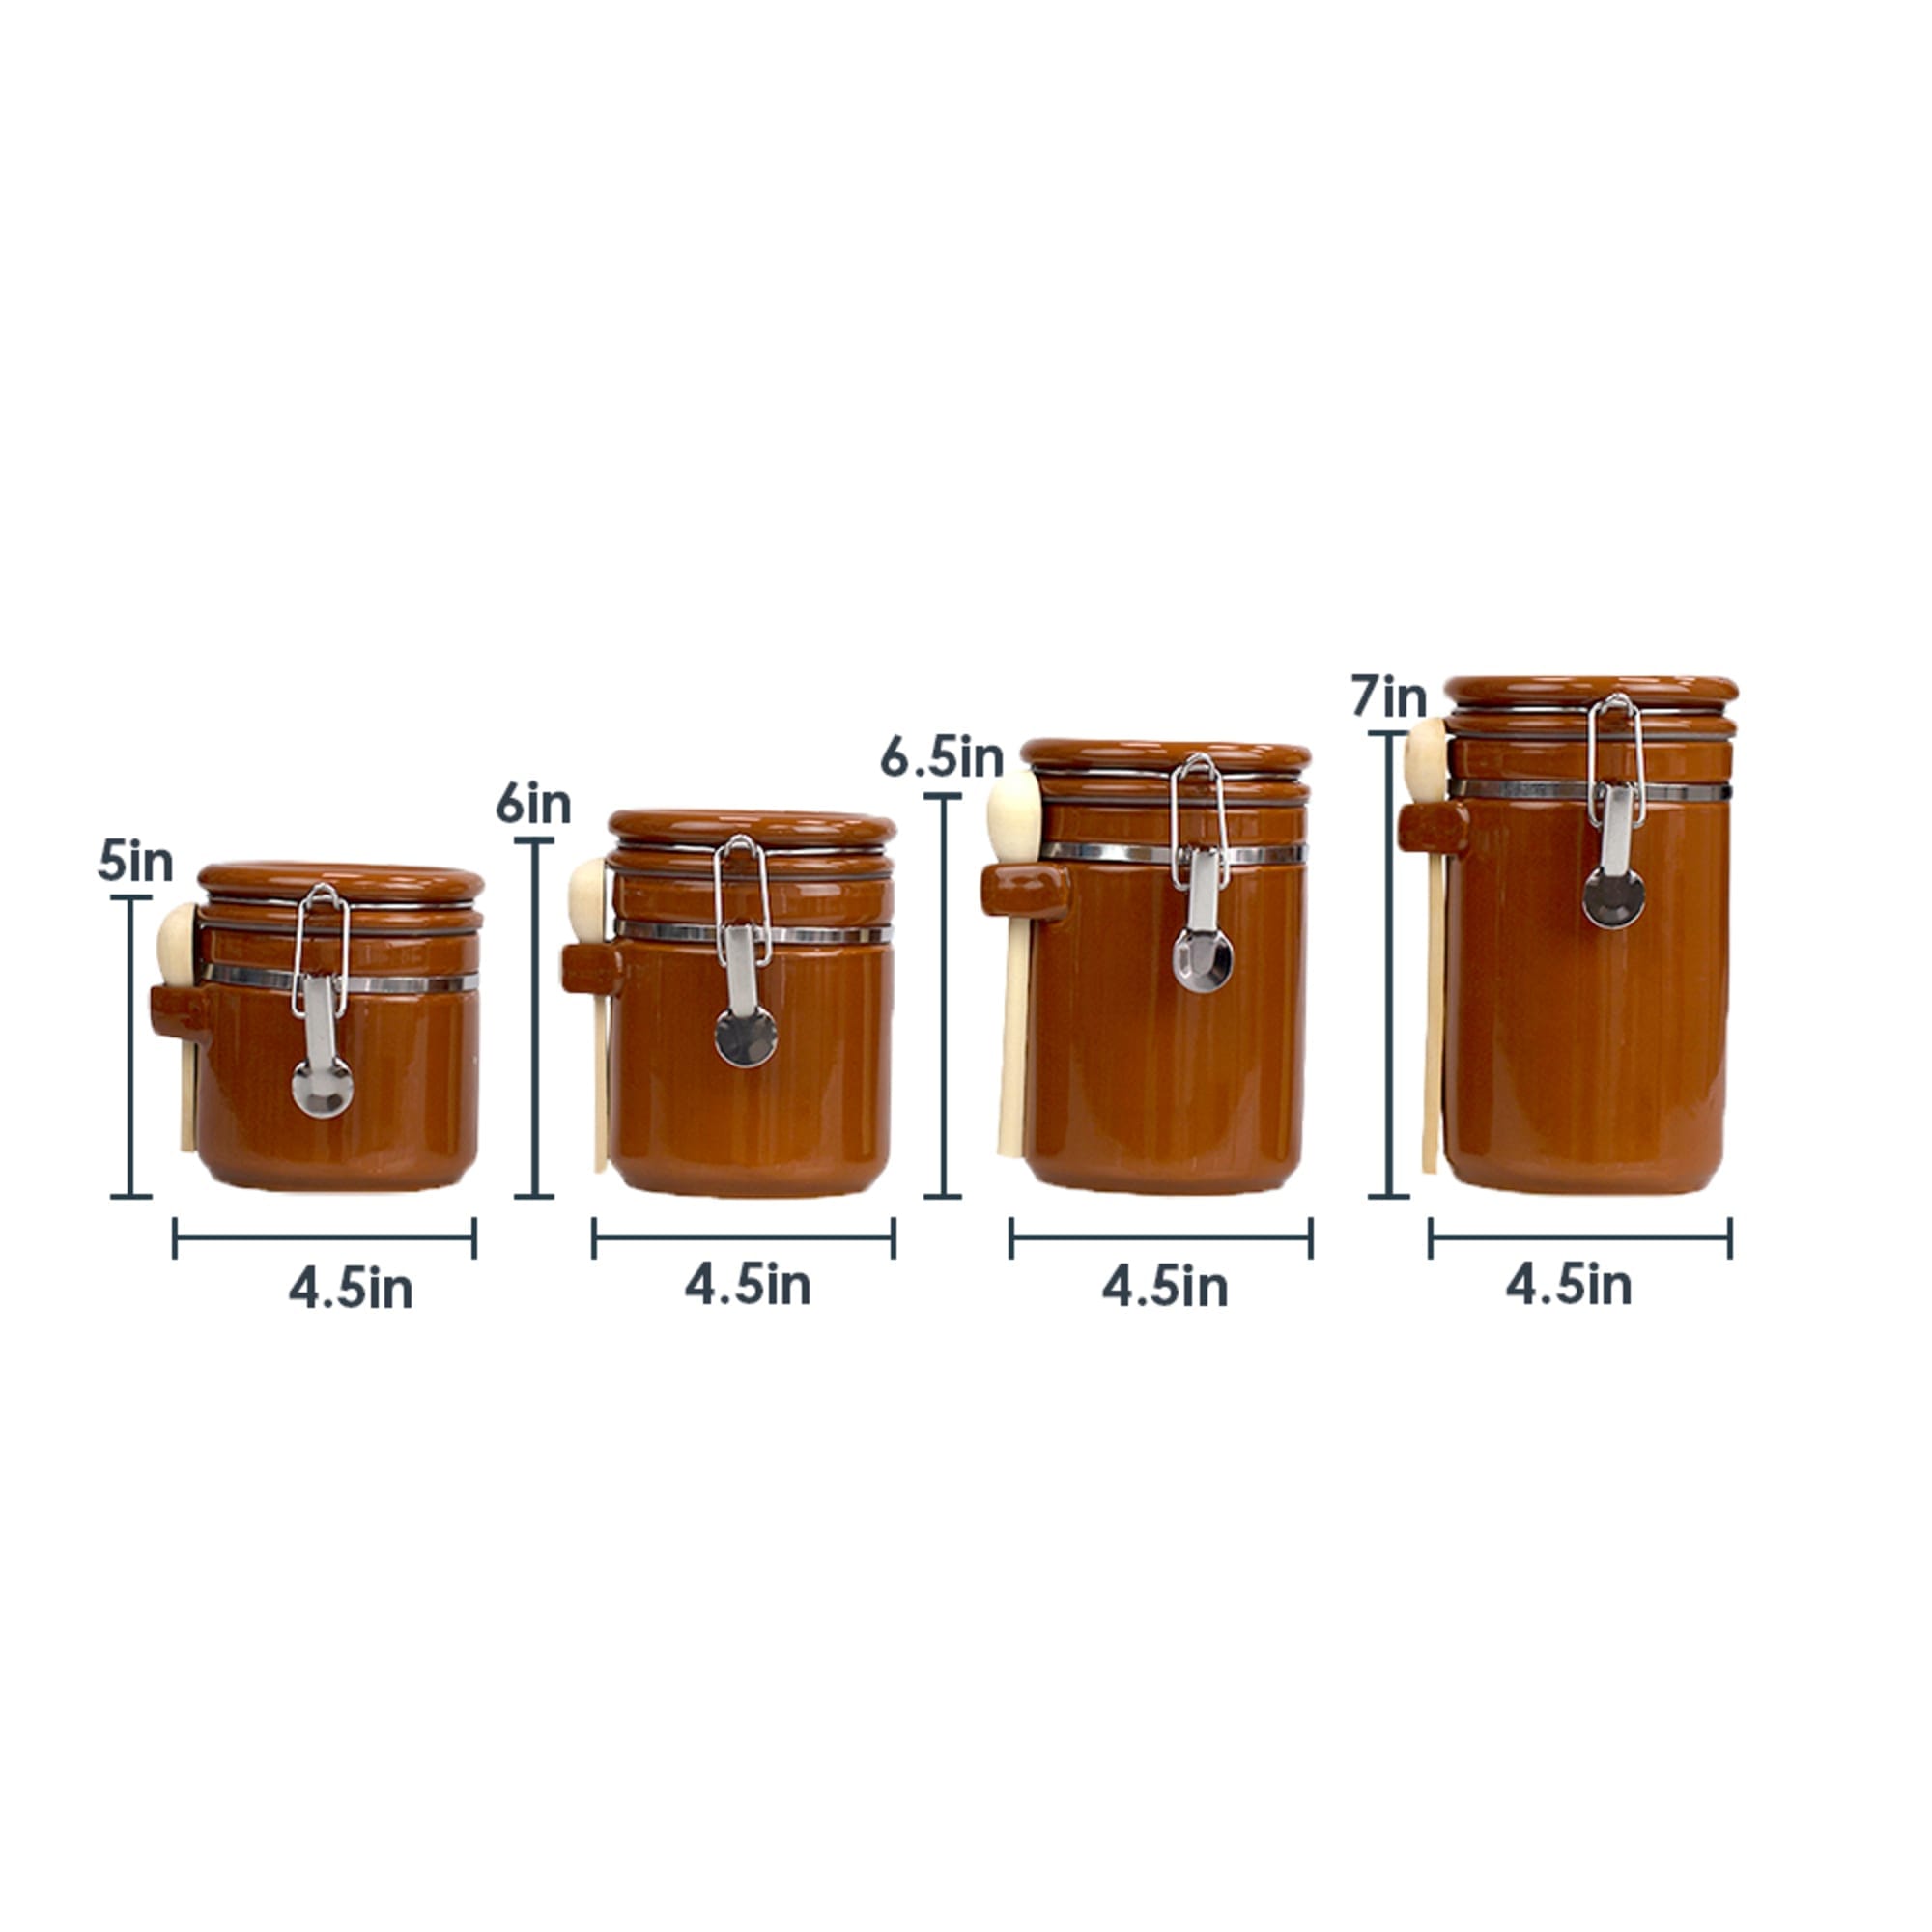 Home Basics 4 Piece Ceramic Canisters with Easy Open Air-Tight Clamp Top Lid and Wooden Spoons, Brown $20.00 EACH, CASE PACK OF 2